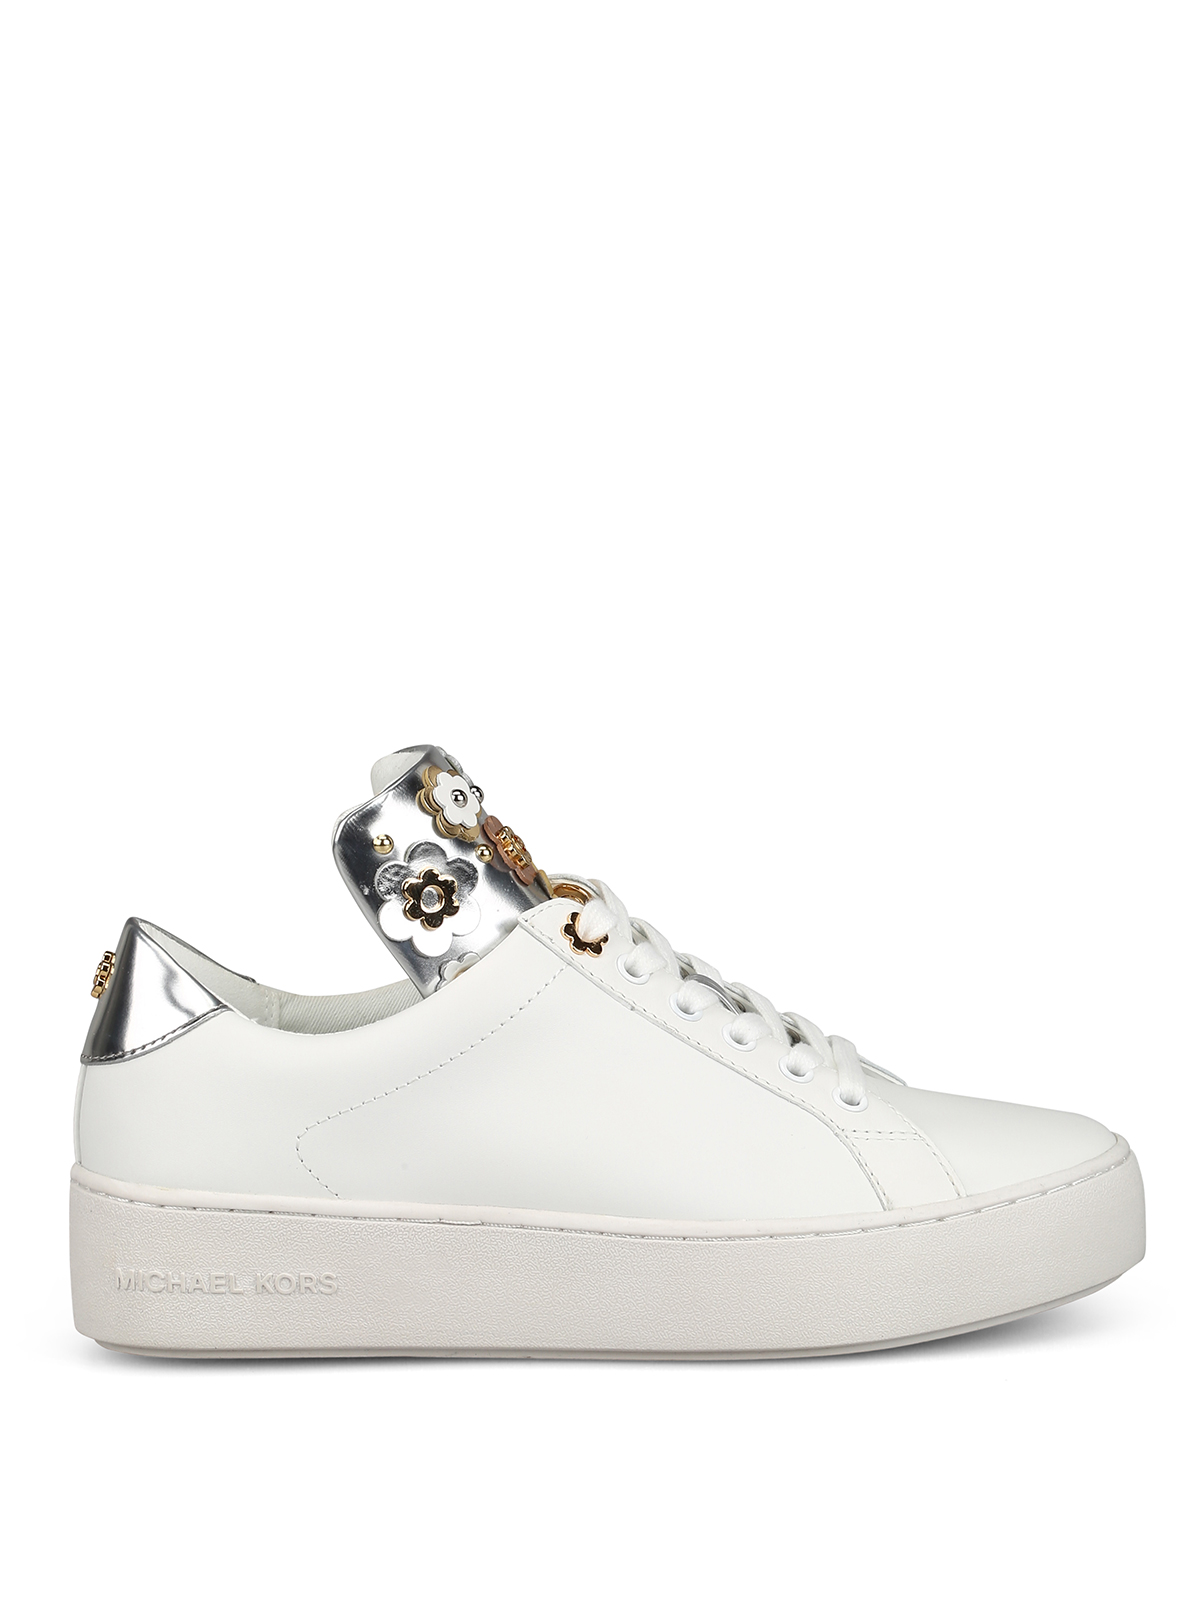 mindy low top leather sneaker